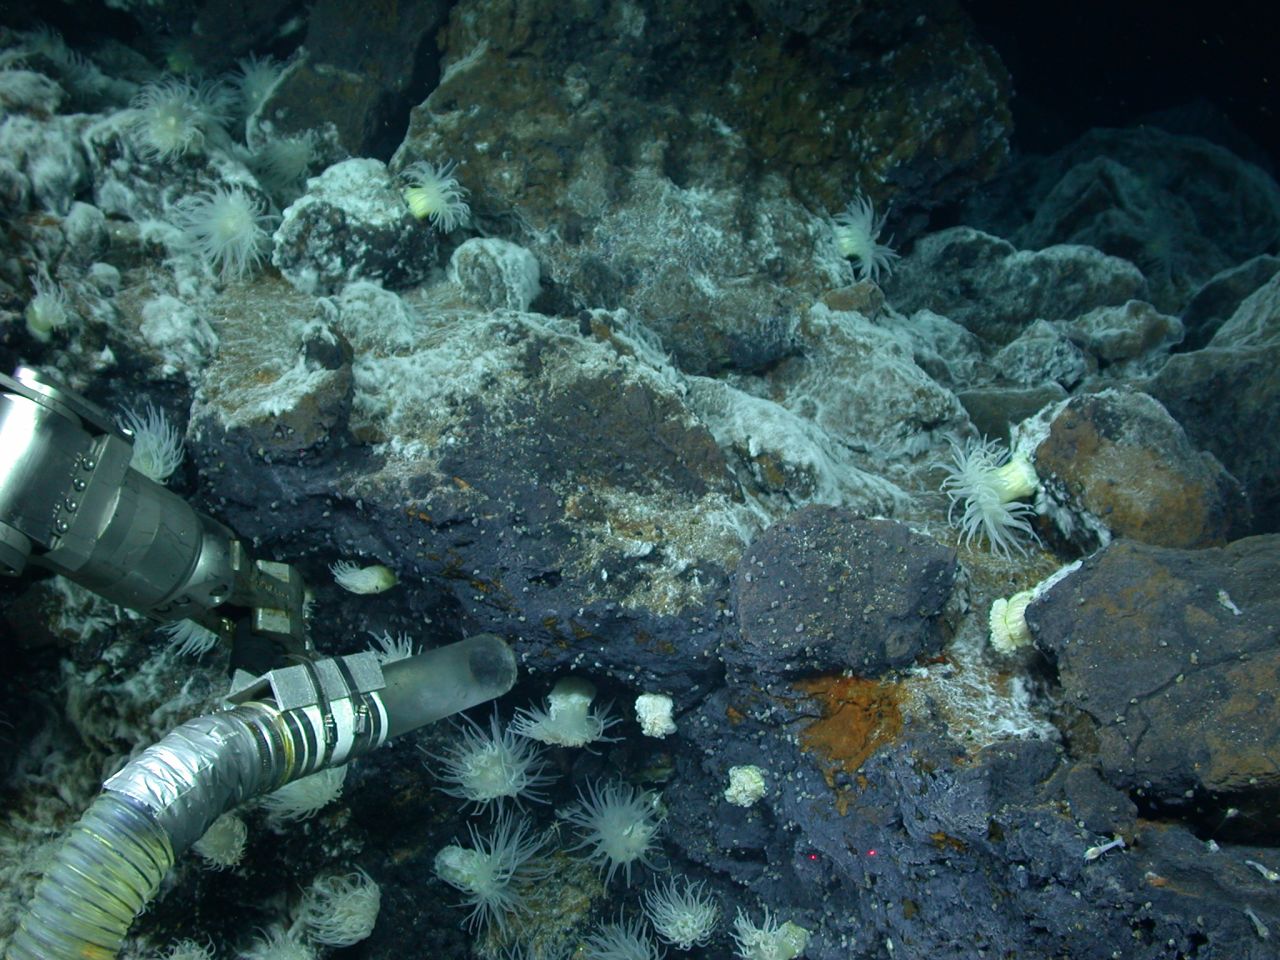 Fueled by chemical energy released from the earth's interior, lush ecosystems thrive at hydrothermal vents. Here, the suction-tube sampler of the Institution's ROV collects a sample of tiny snails.